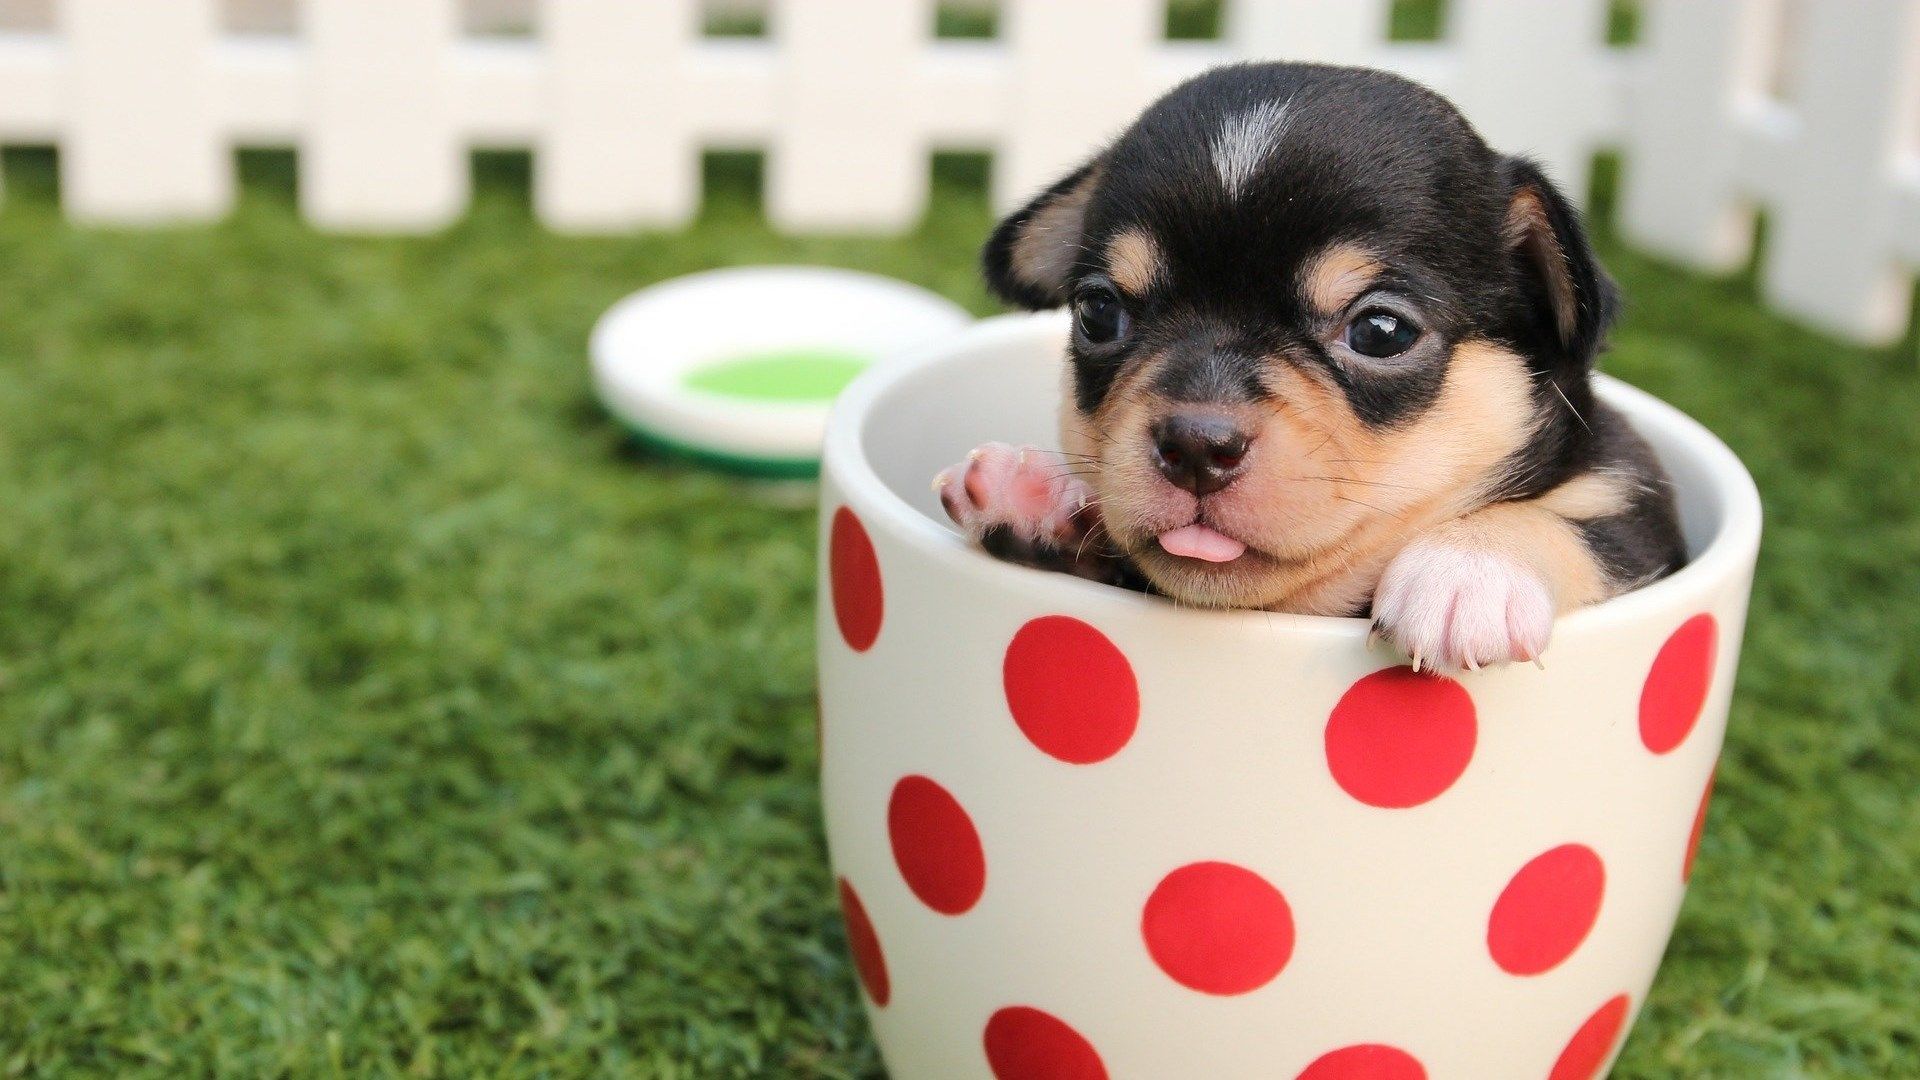 Puppy Wallpapers HD